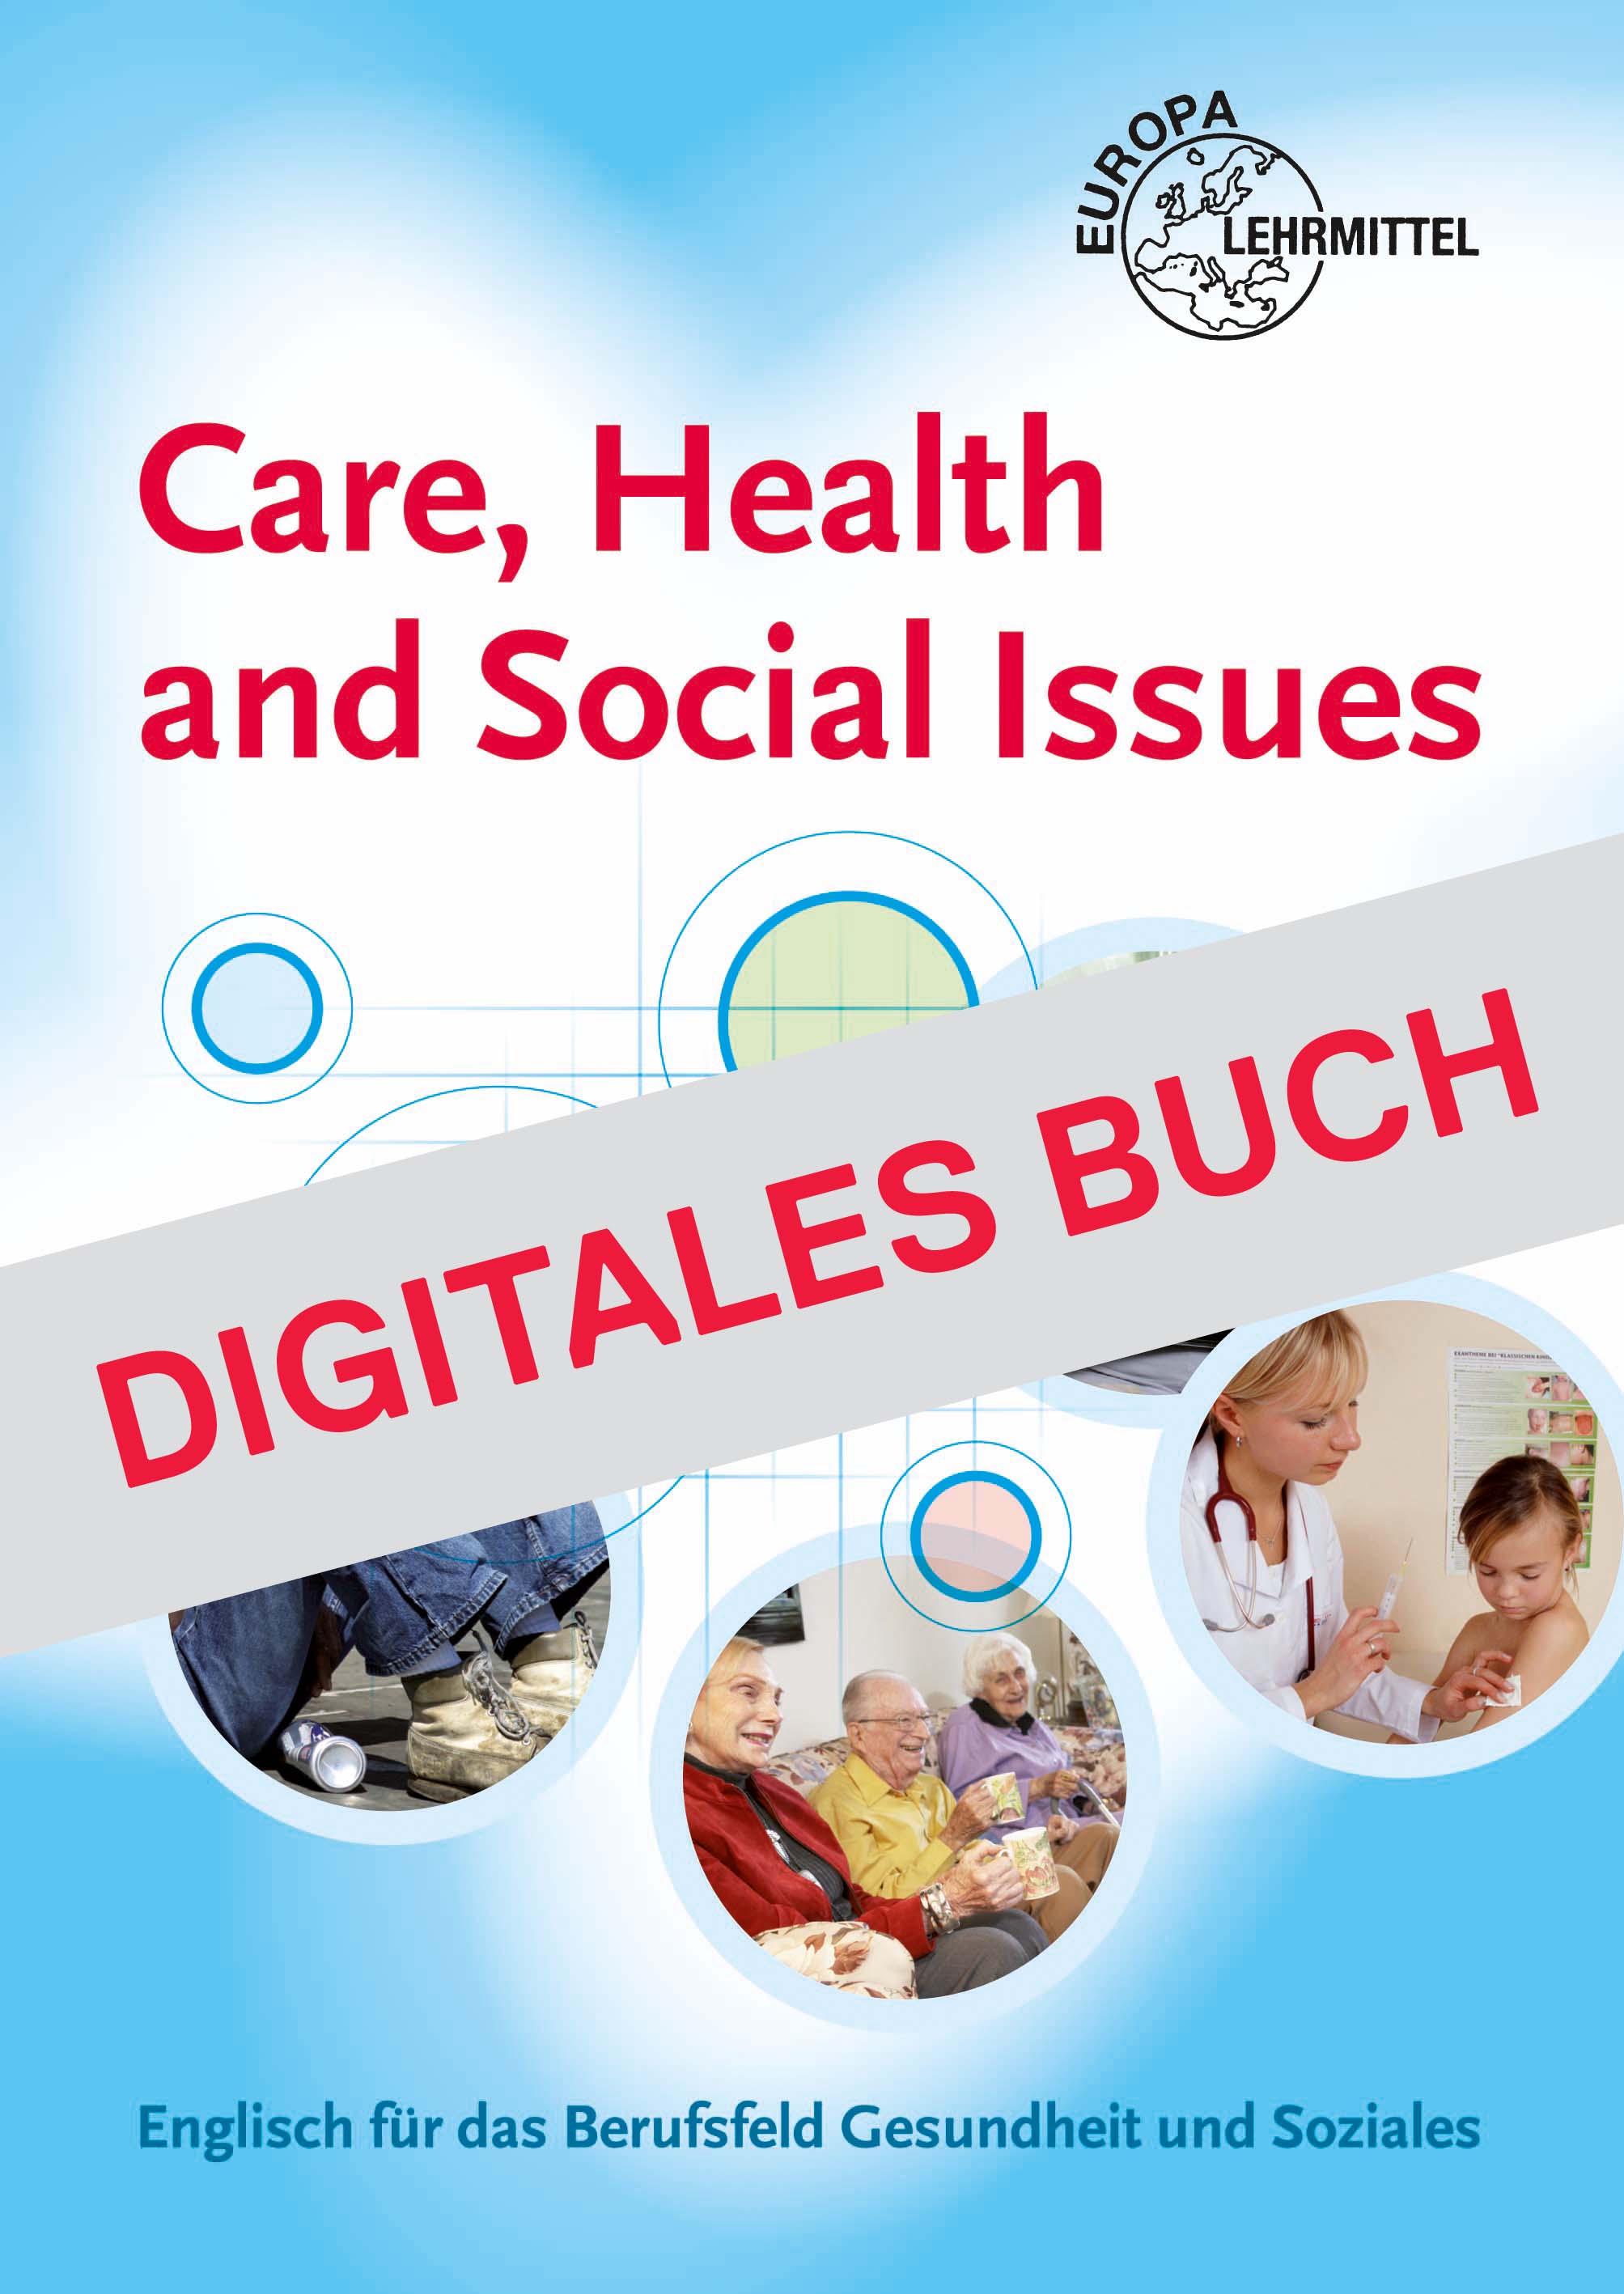 Care, Health and Social Issues - Digitales Buch